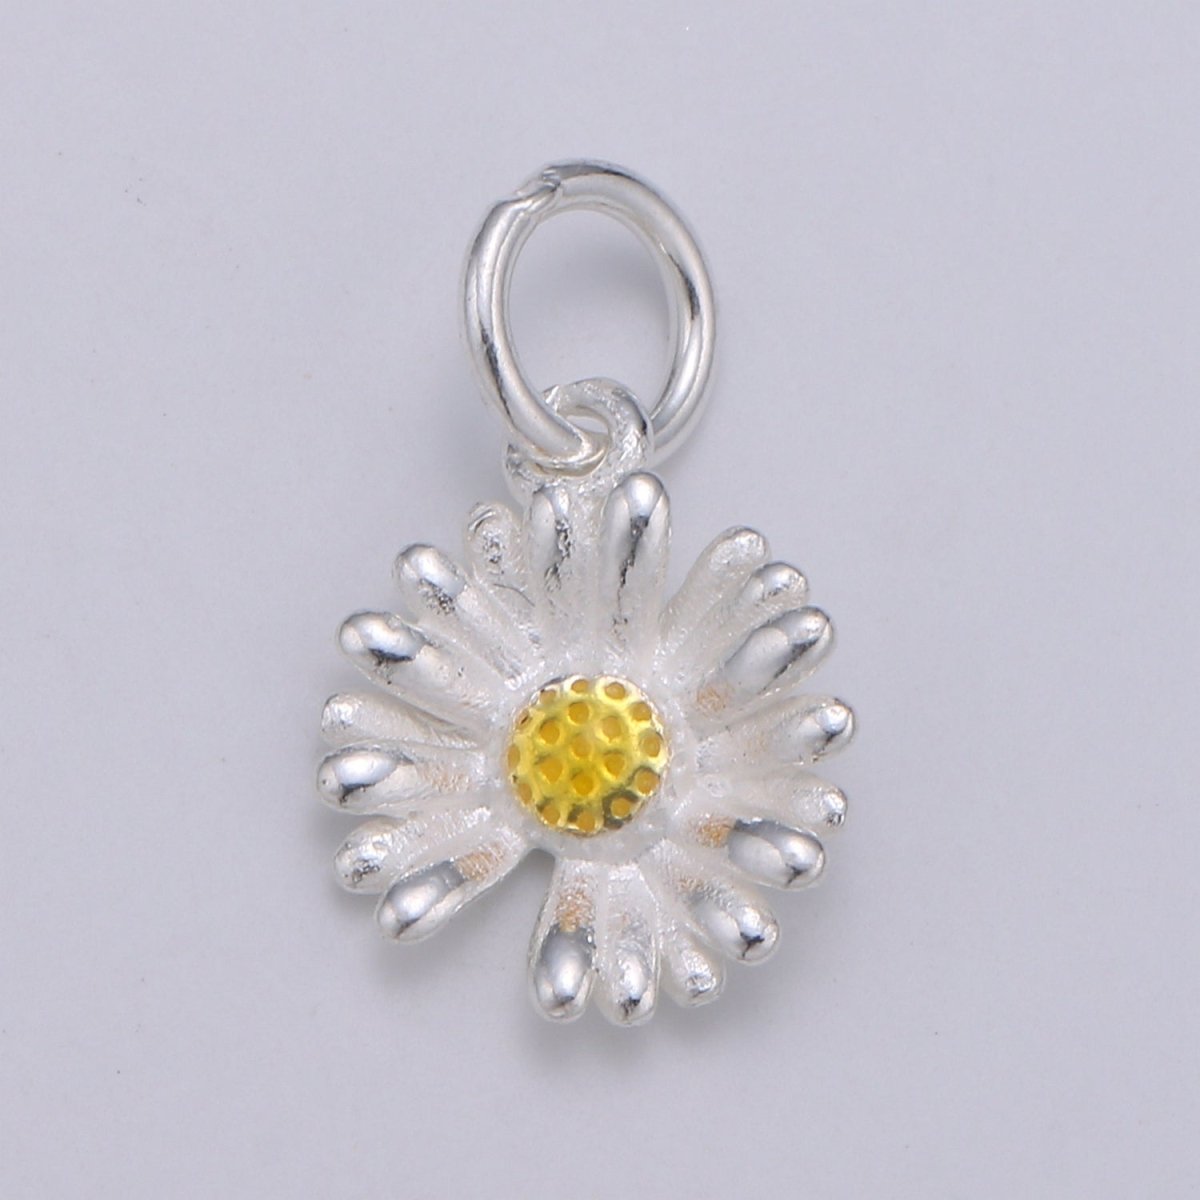 925 Sterling Silver Daisy Charm, Floral Charm Silver Flower Charm for Necklace Bracelet Earring, Yellow Daisy Charm SL-045 - DLUXCA